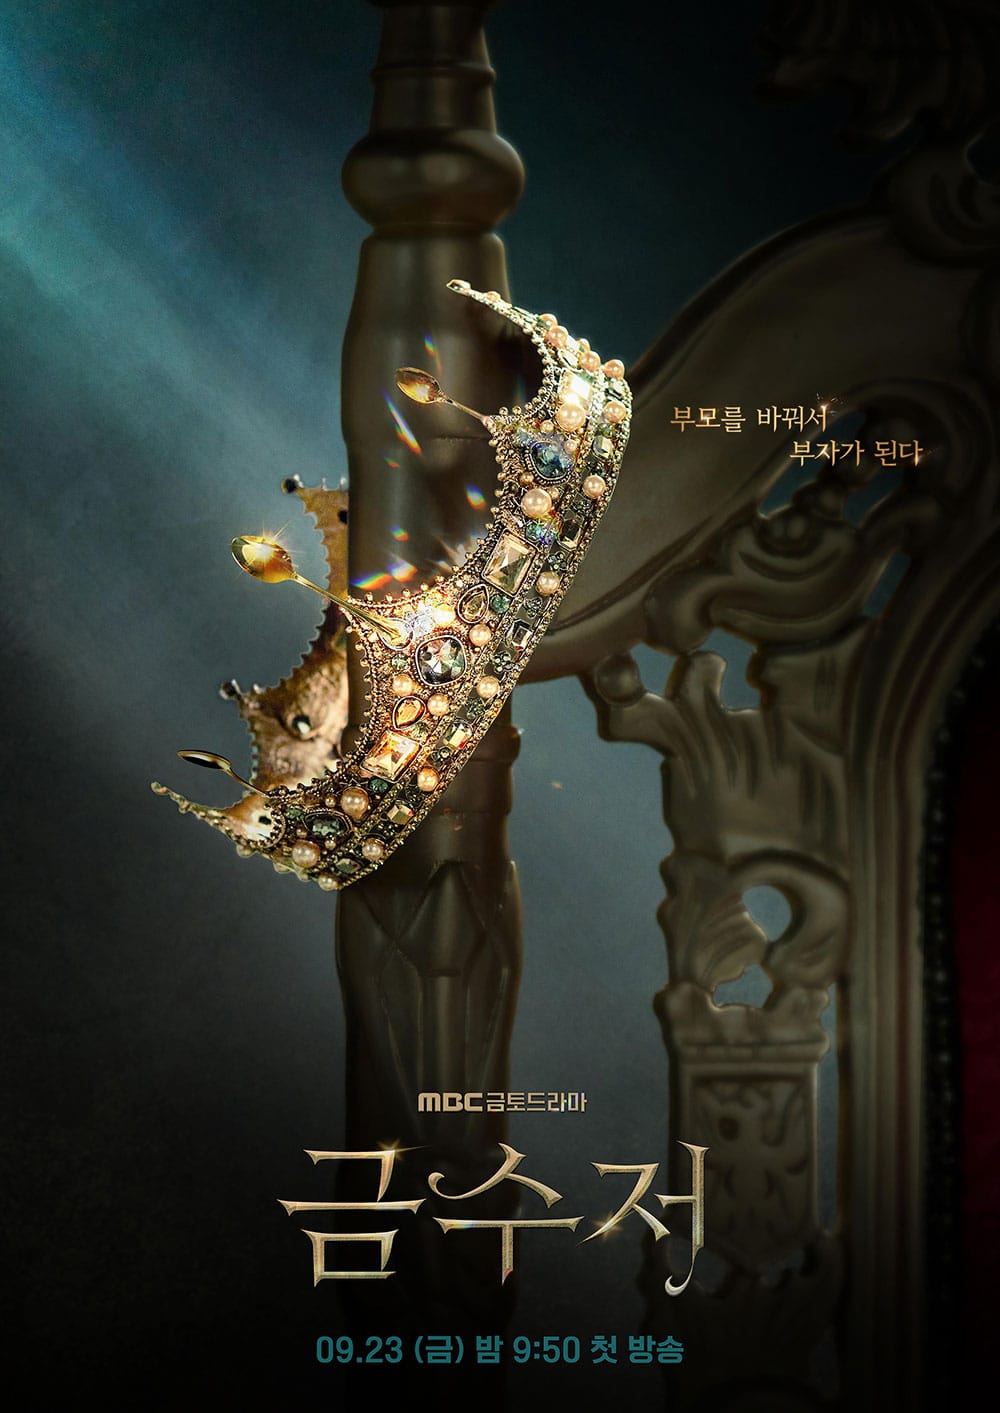 The Golden Spoon (2022) - 금수저